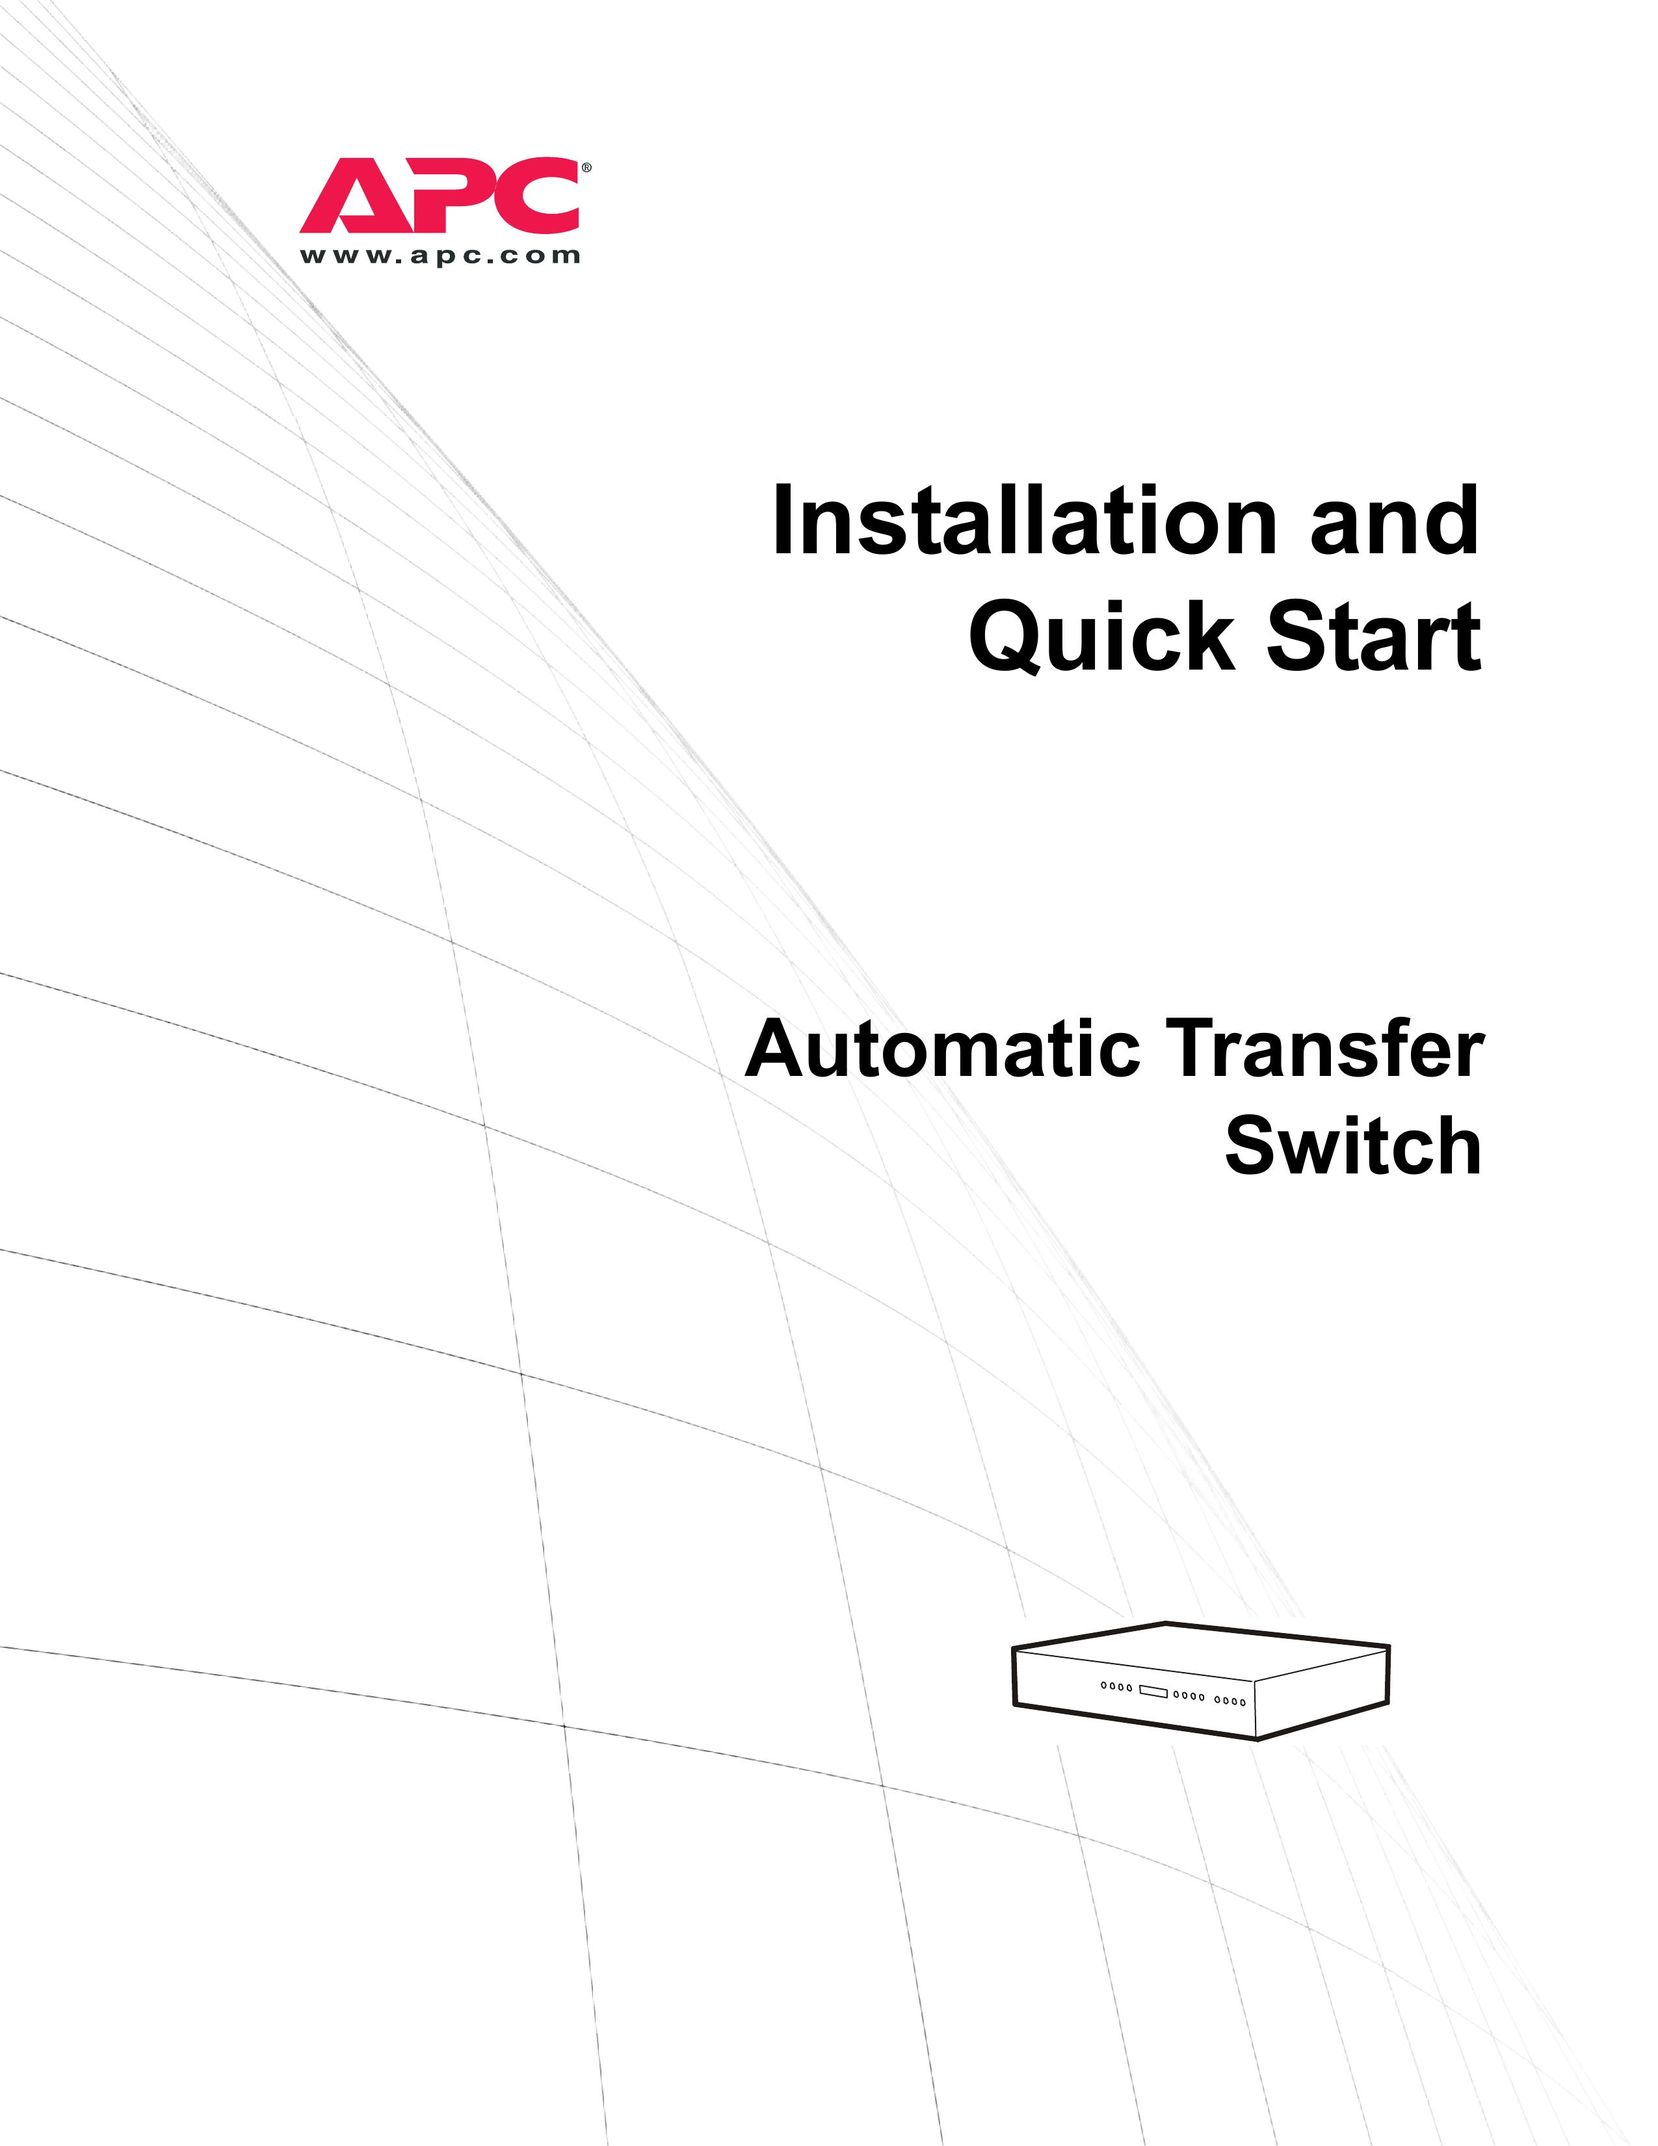 American Power Conversion Automatic Transfer Switch User Manual